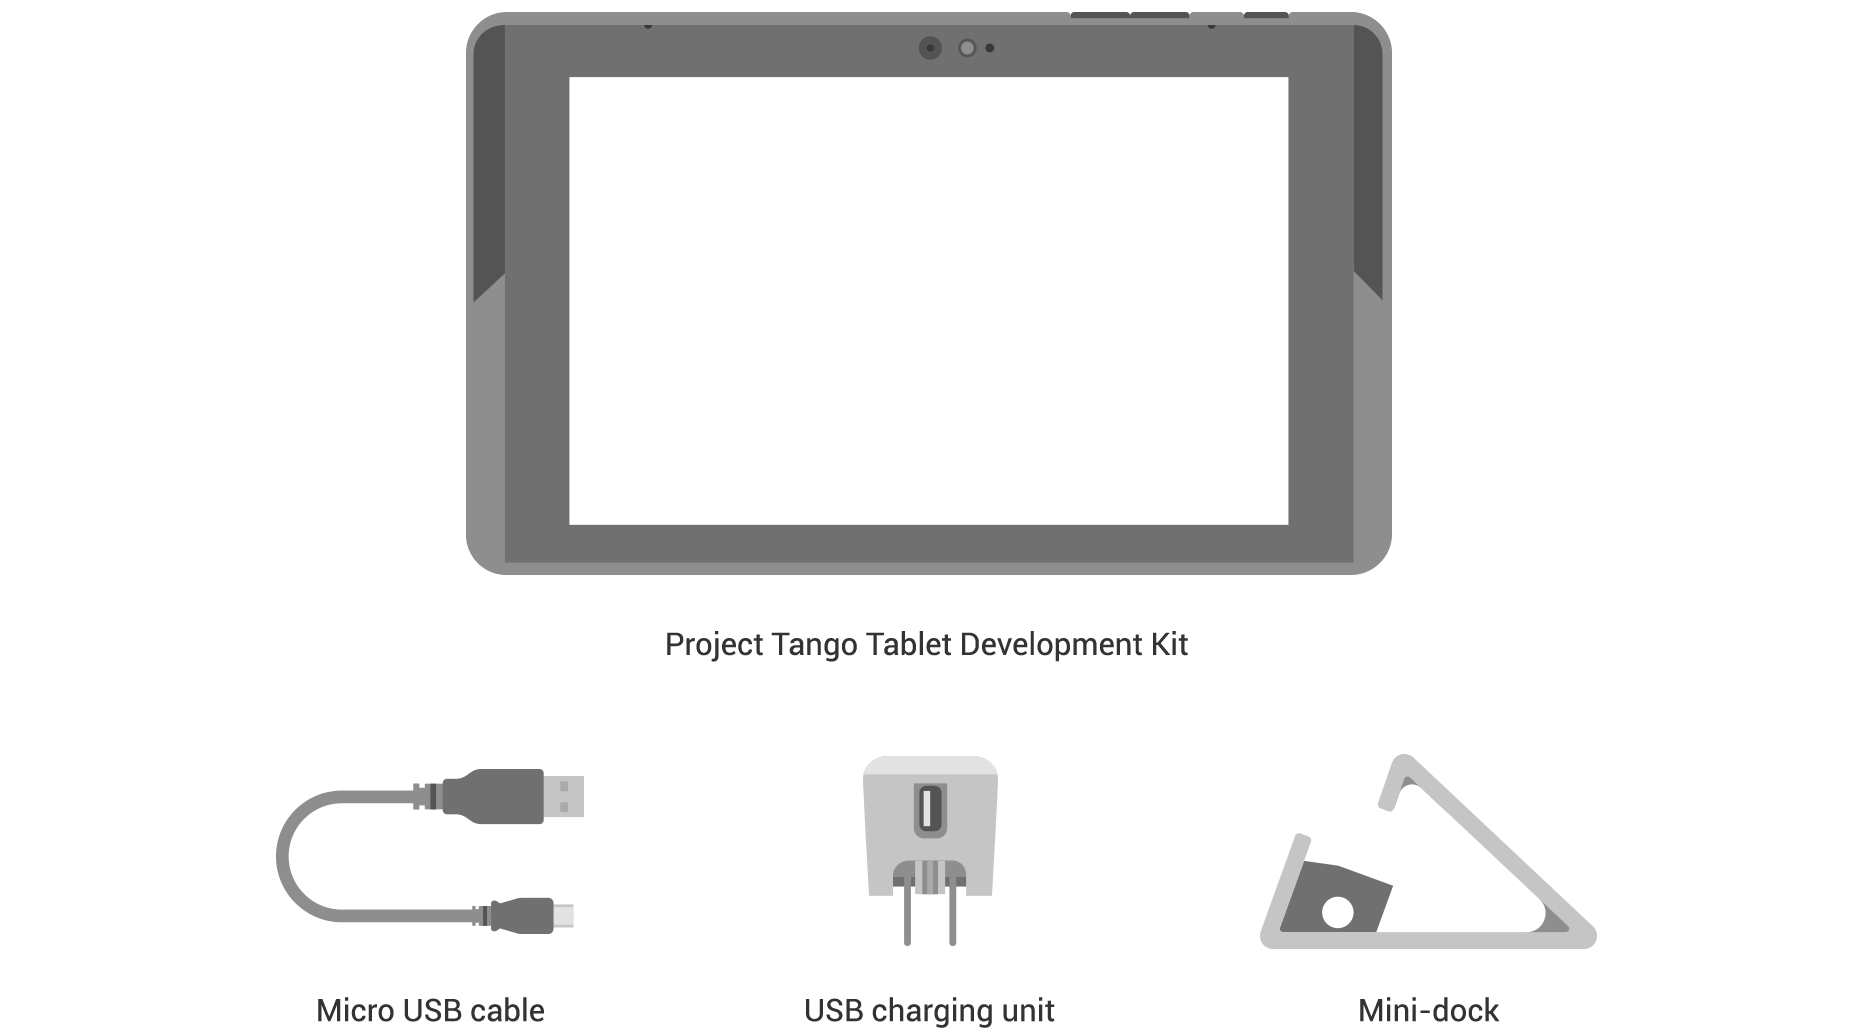 The Project Tango Tablet Development Kit comes with a Project Tango
         Tablet Developent Kit, micro-USB cable, USB charging unit, and a
         mini-dock.